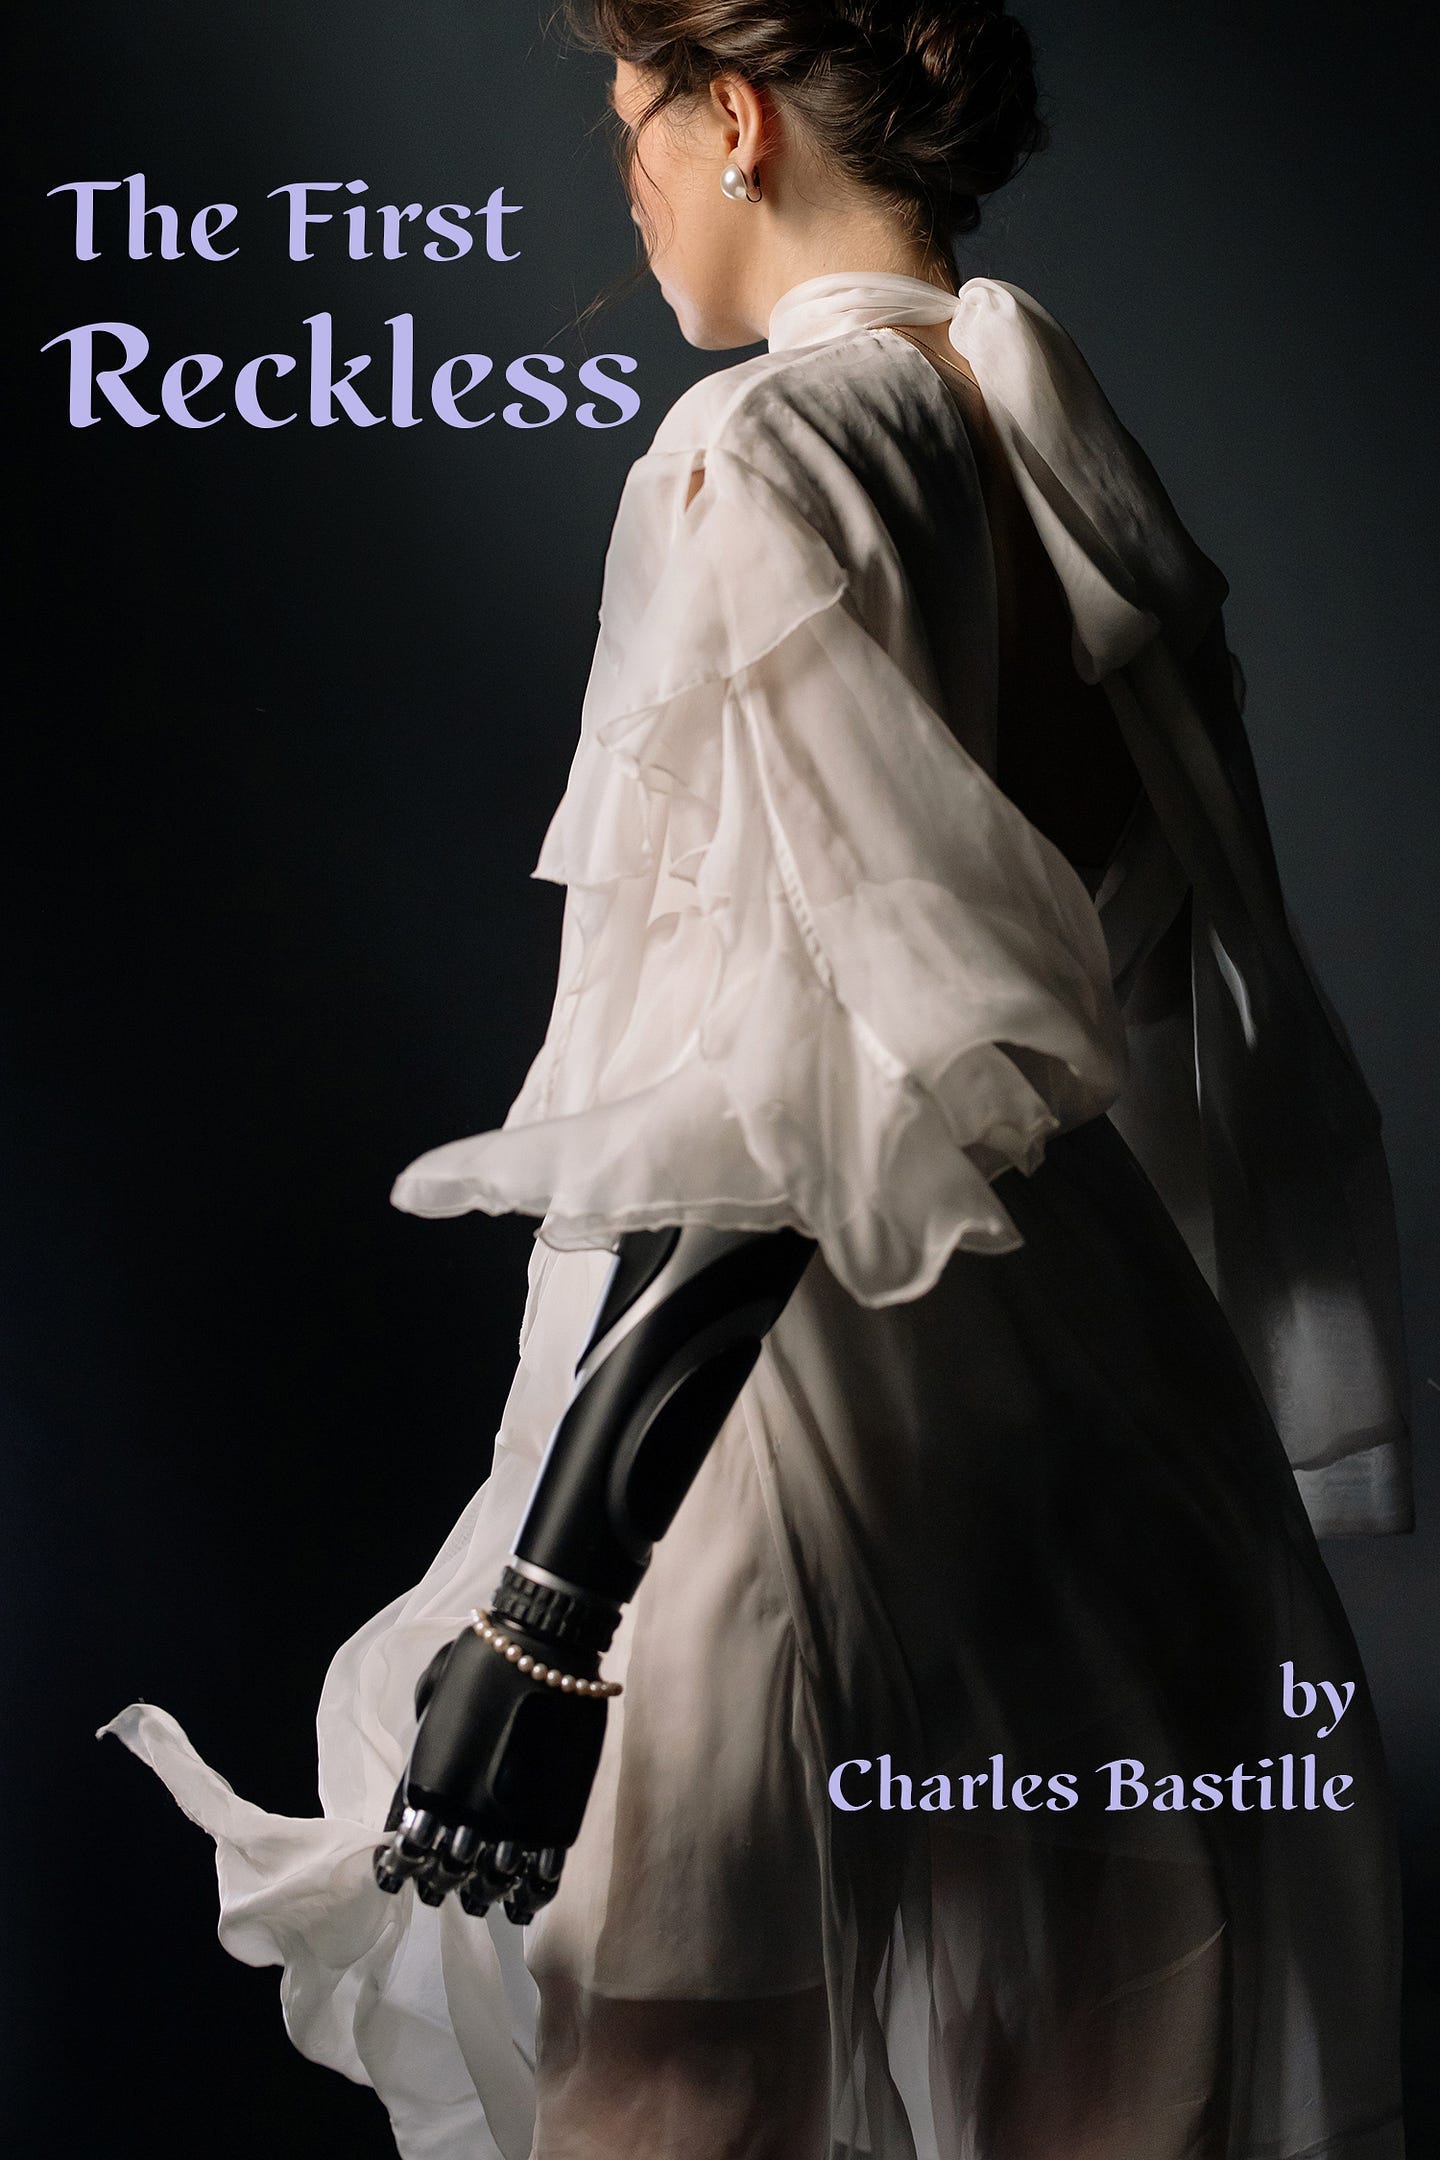 The First Reckless by Charles Bastille